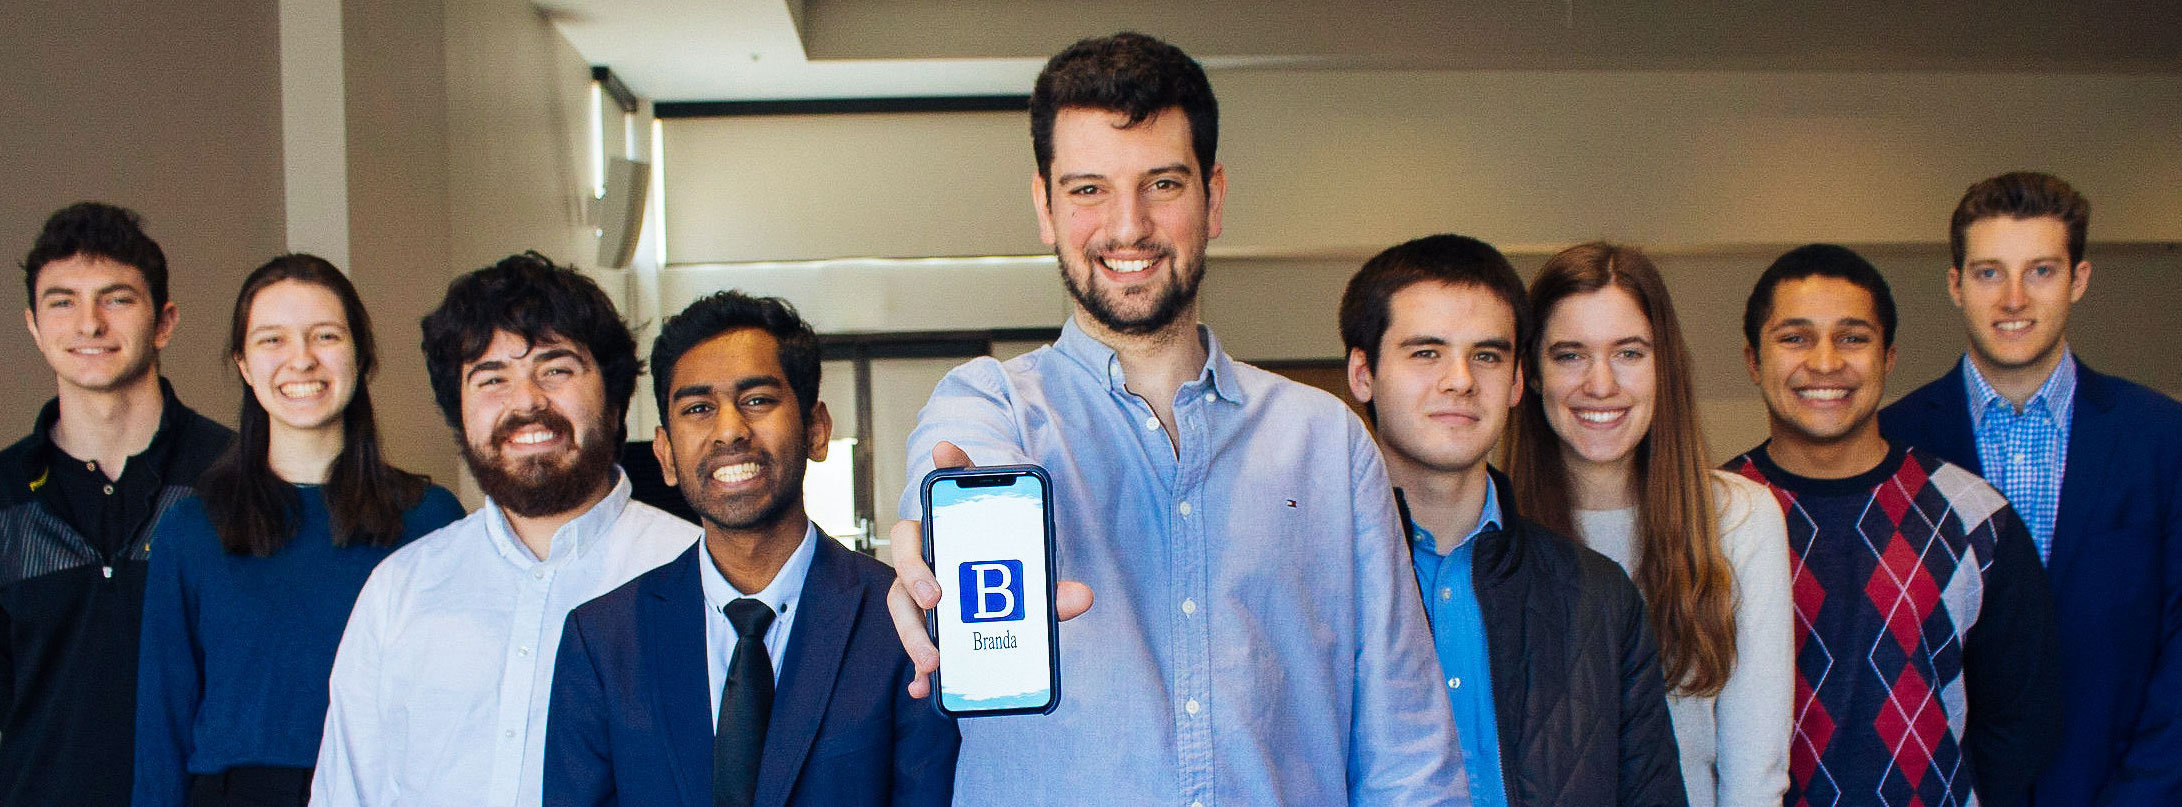 A group of students all smiling at the camera while the student in front holds up a phone with the Branda app displaying on it